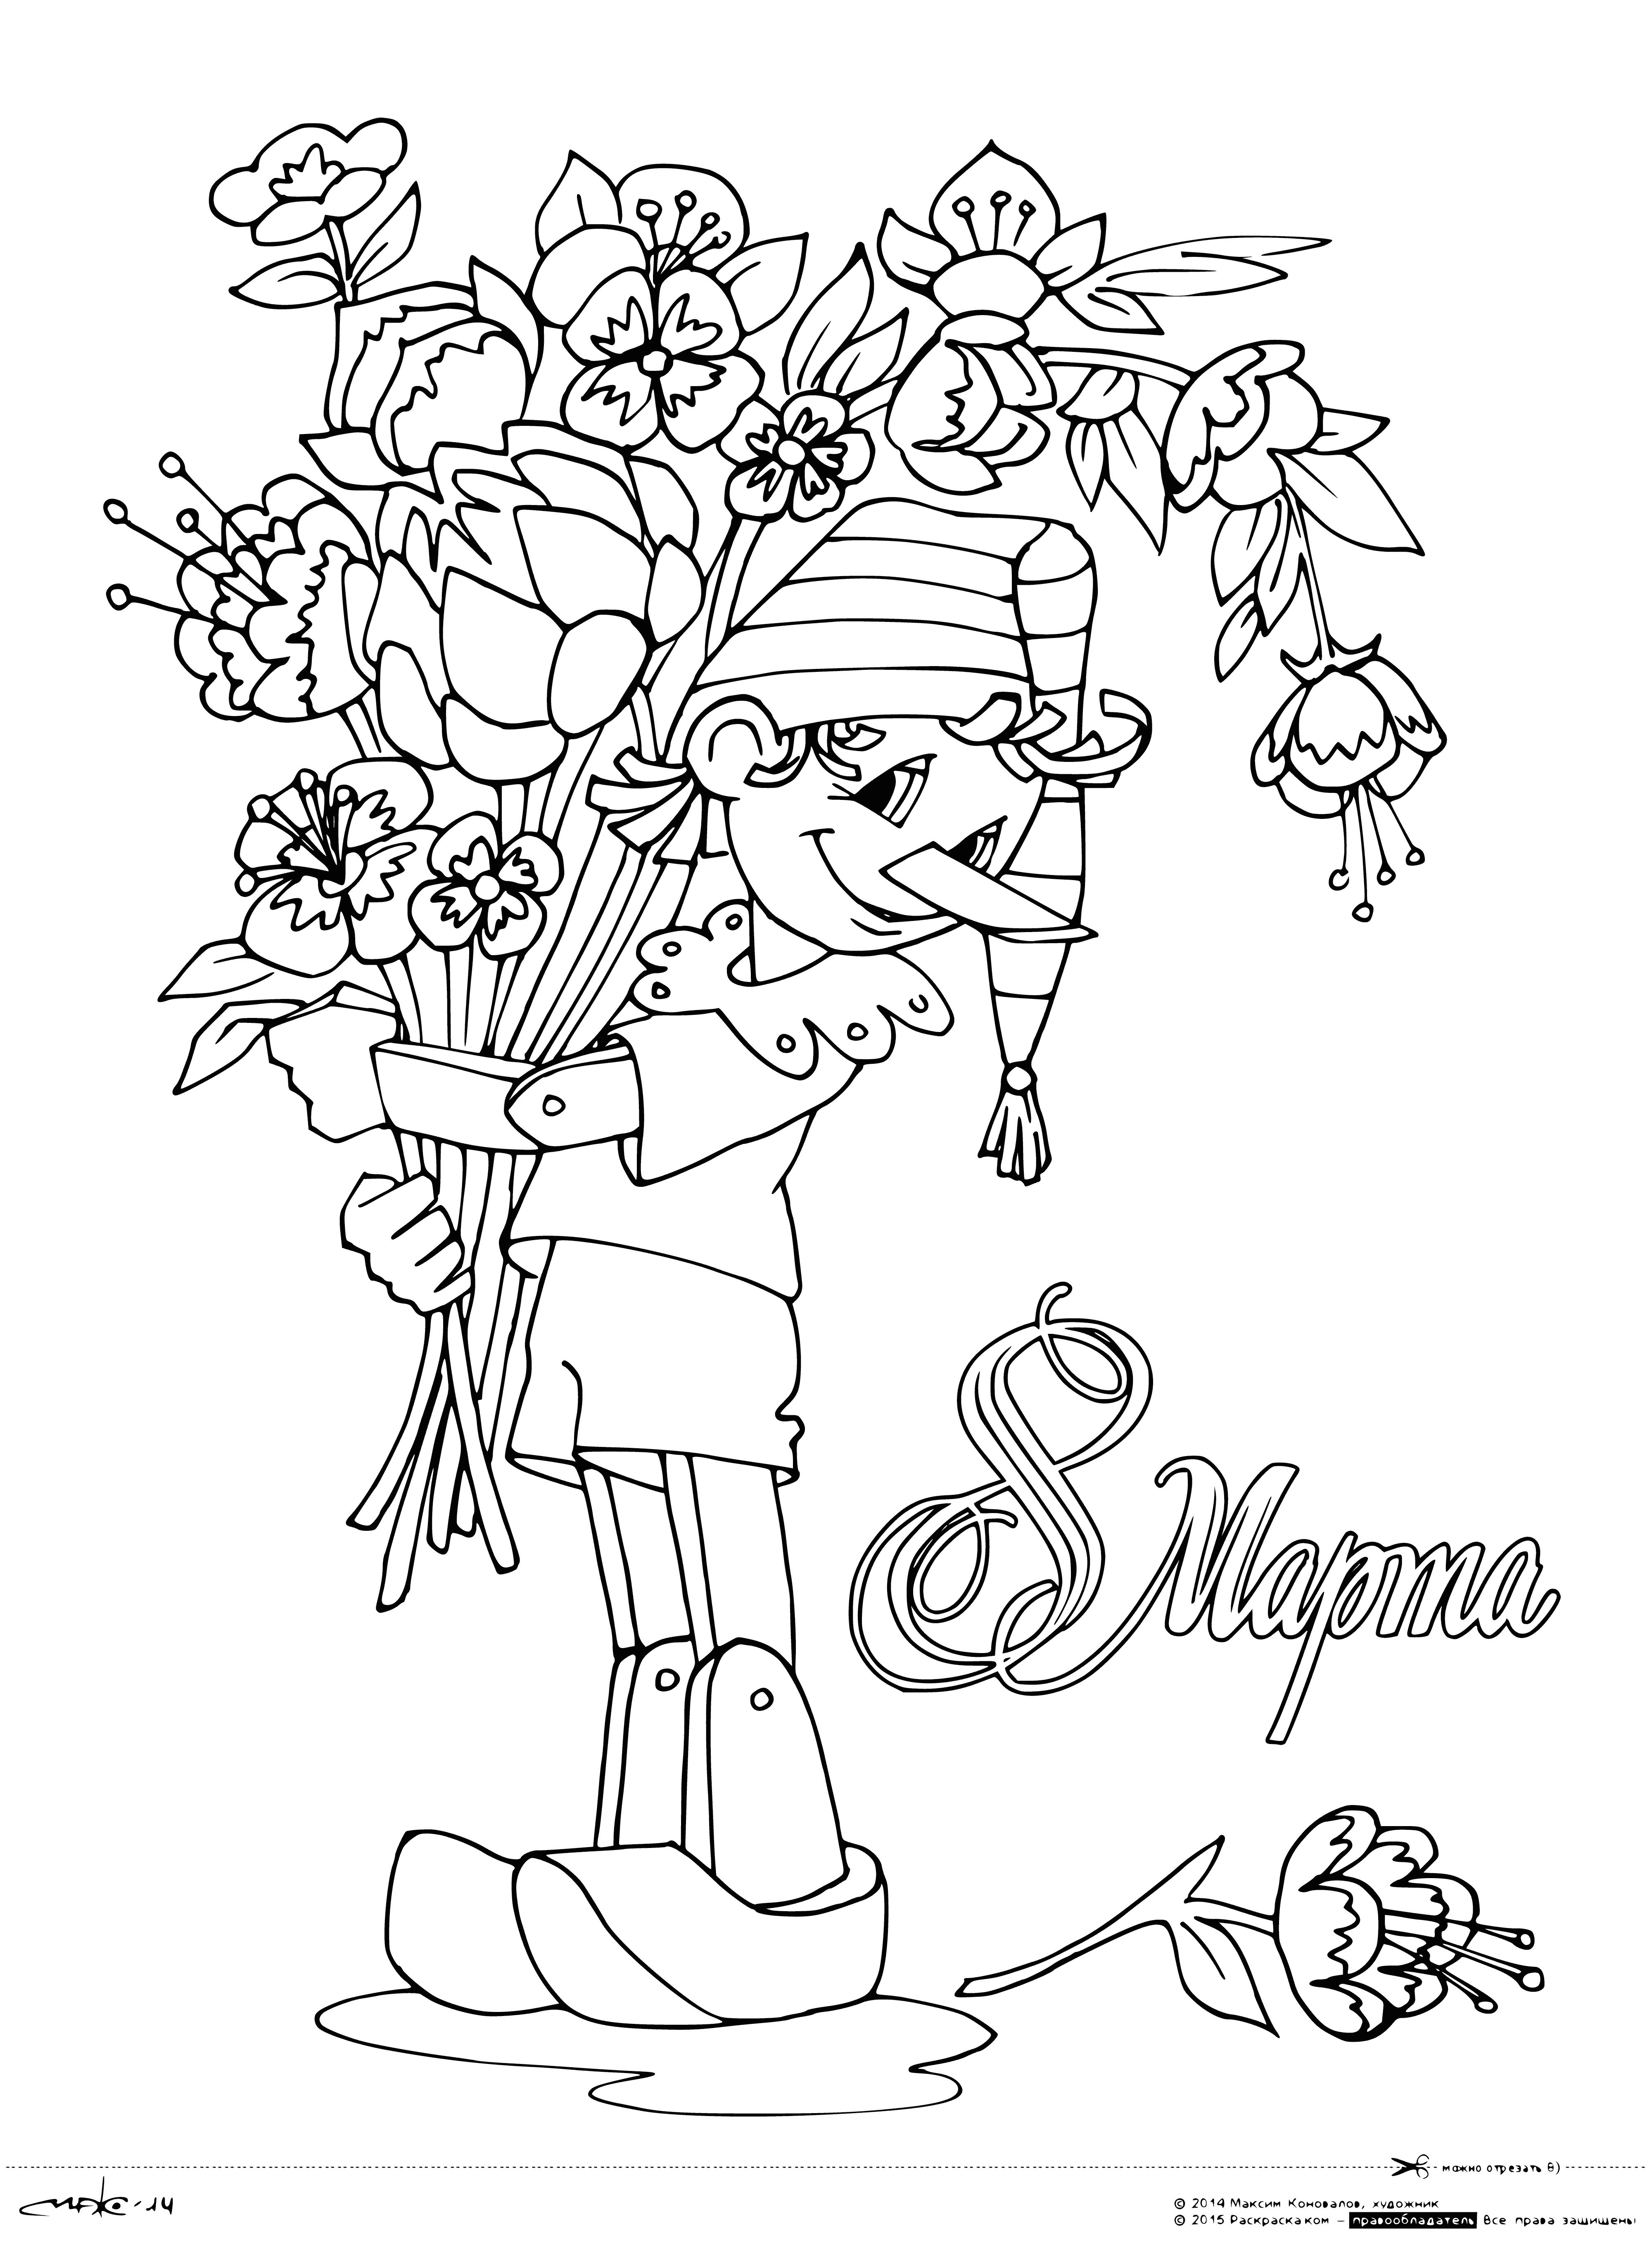 coloring page: Pinocchio gives bouquet to smiling woman on Int'l Women's Day; she has hand on her chest, wearing blue dress & white scarf.